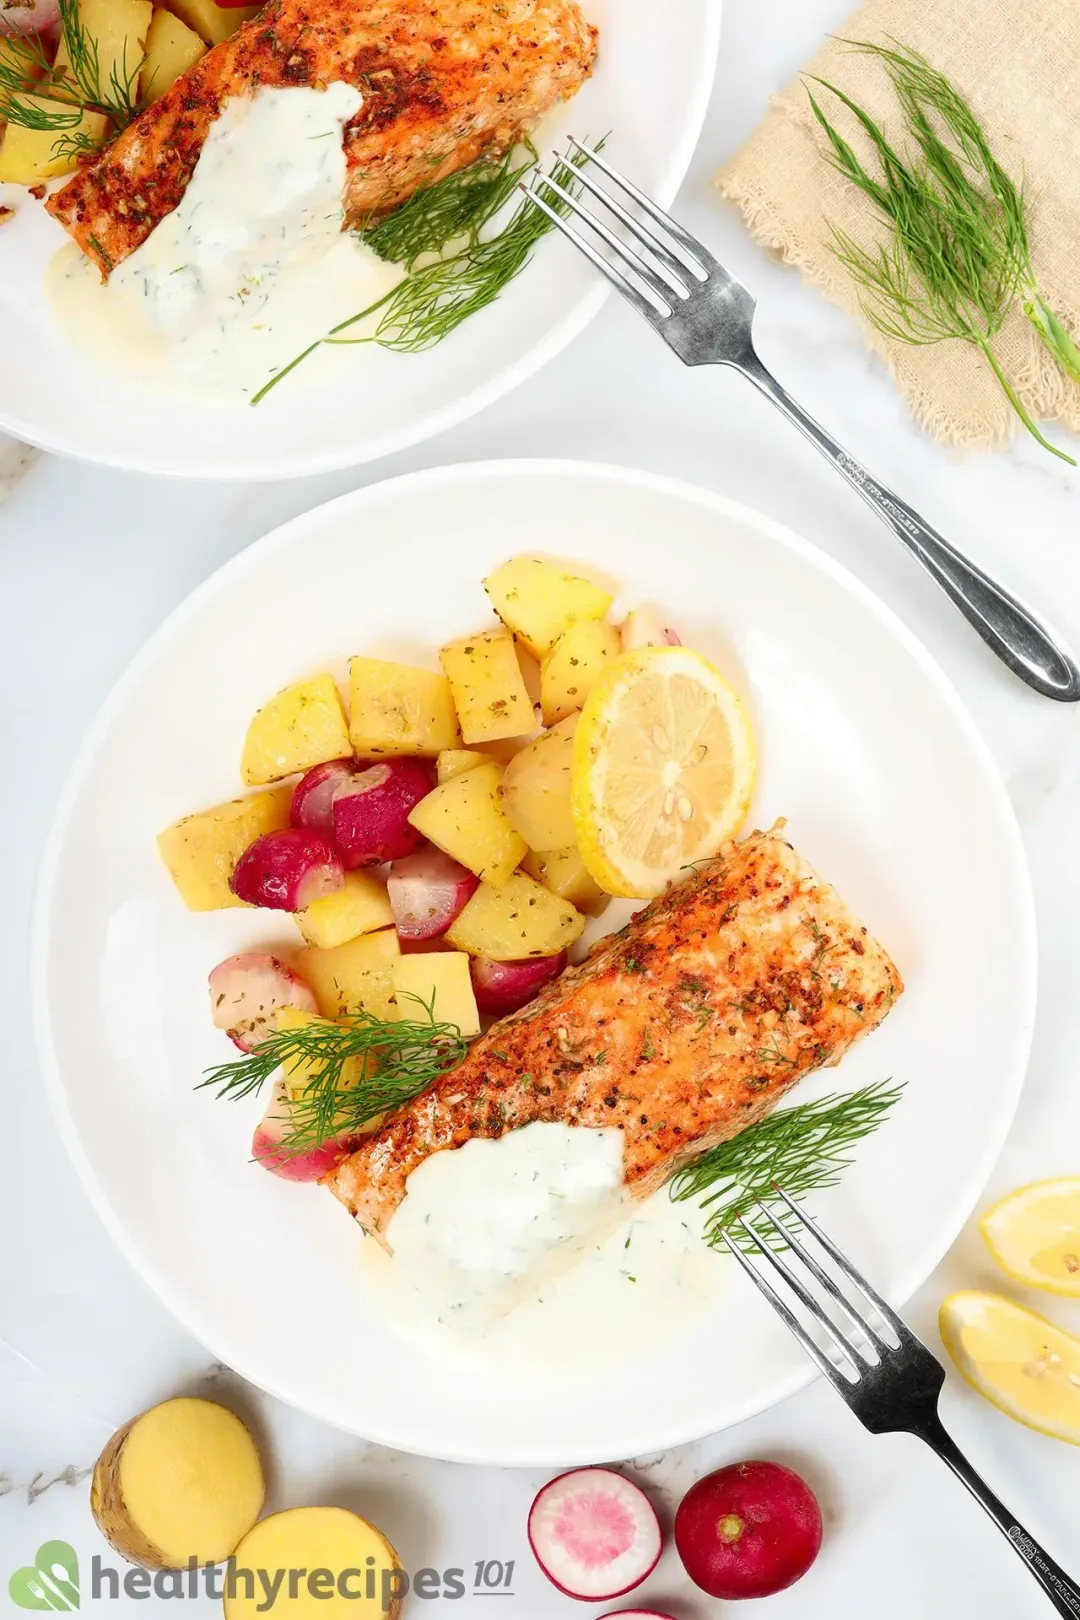 Two plates of salmon, potato cubes, radish cubes, and dill decorated by halved potatoes, halved radishes, two forks, and a tablecloth